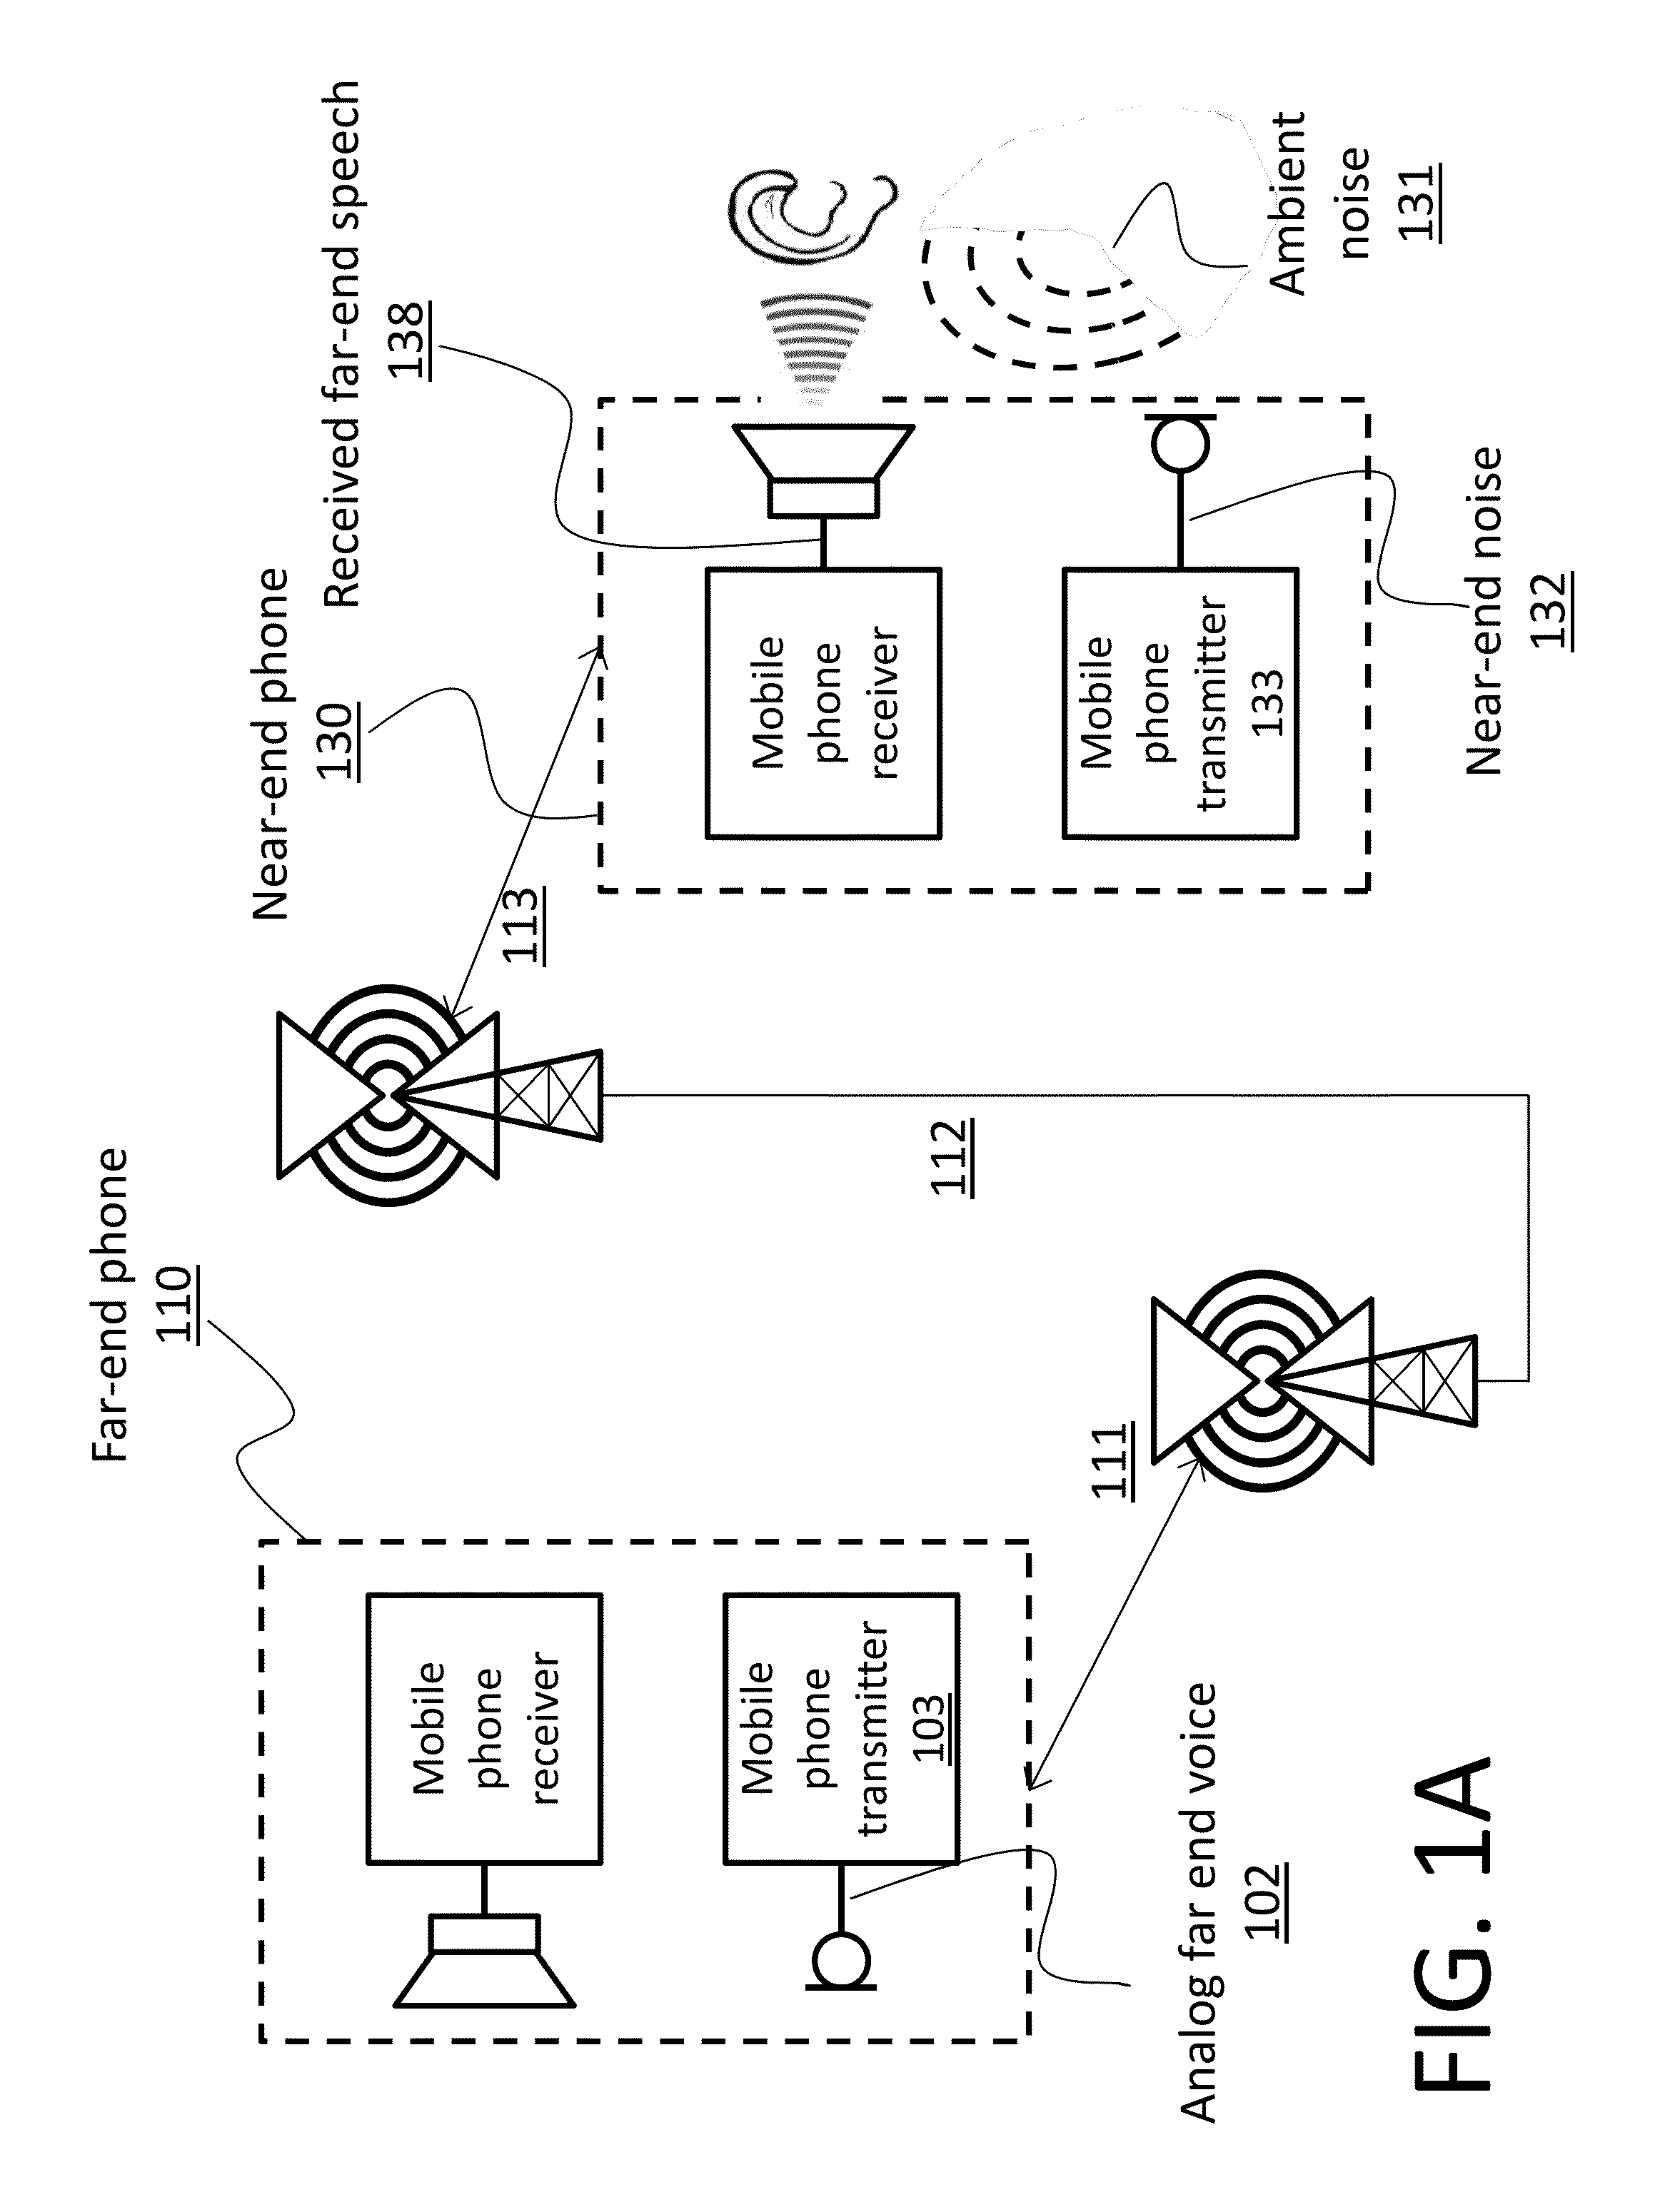 Method for adaptive audio signal shaping for improved playback in a noisy environment